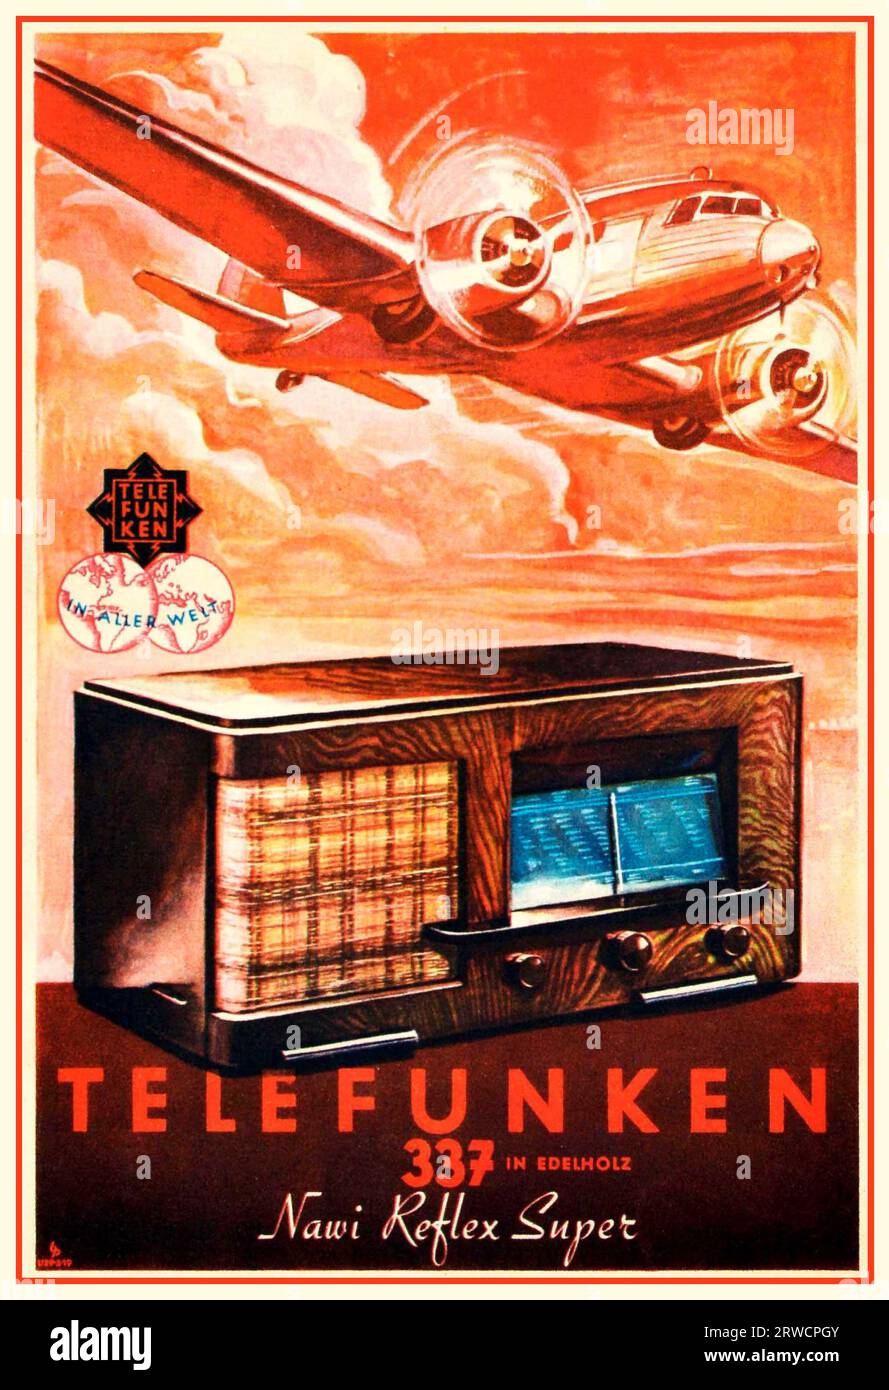 1930s Nazi Germany Radio Poster vintage advertising poster flyer for Telefunken 337 in Edelholz Nawi Reflex Super radio set with an illustration of a plane flying over the radio,  Nazi Germany,  1937. Stock Photo